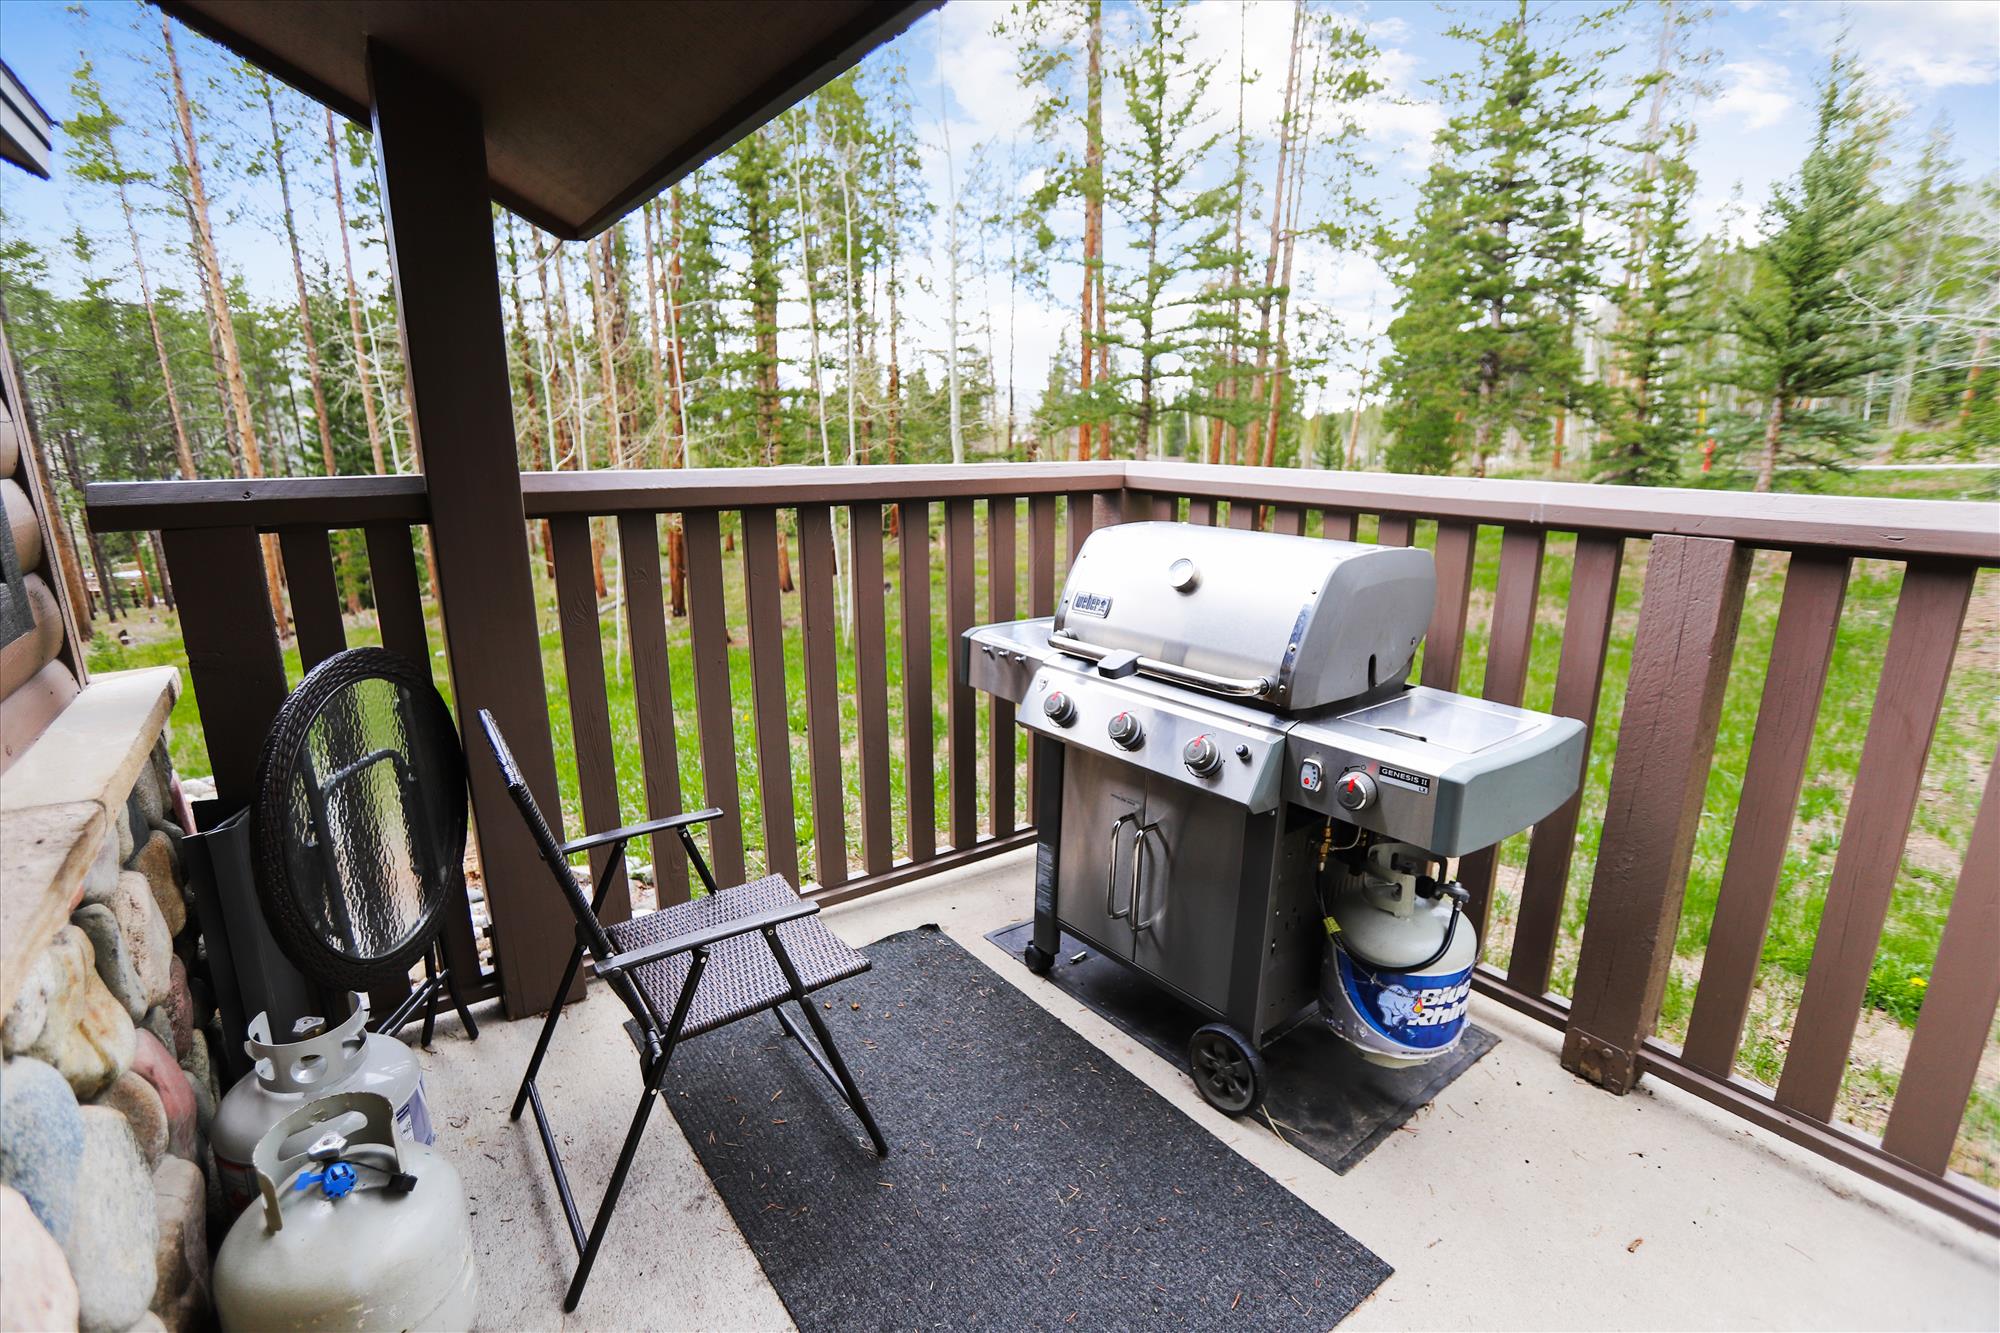 Have a barbecue on a warm summer night with this provided grill - Evergreen Lodge Breckenridge Vacation Rental